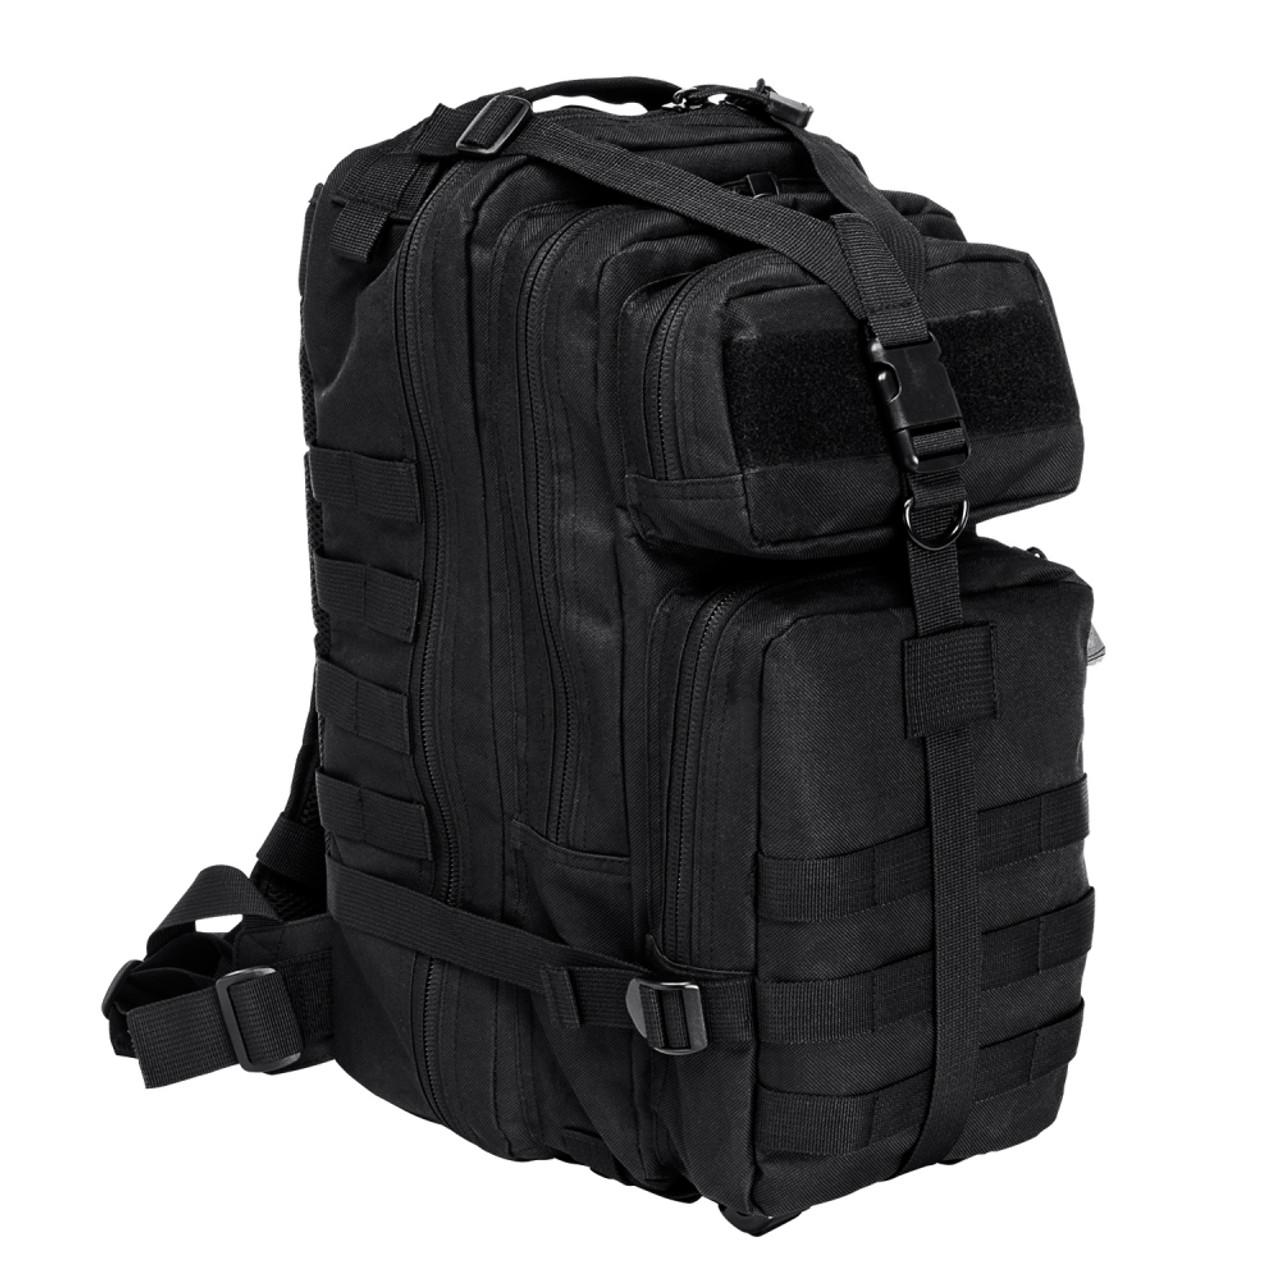 NcSTAR CBSB2949 Tactical Small Compact Utility Backpack